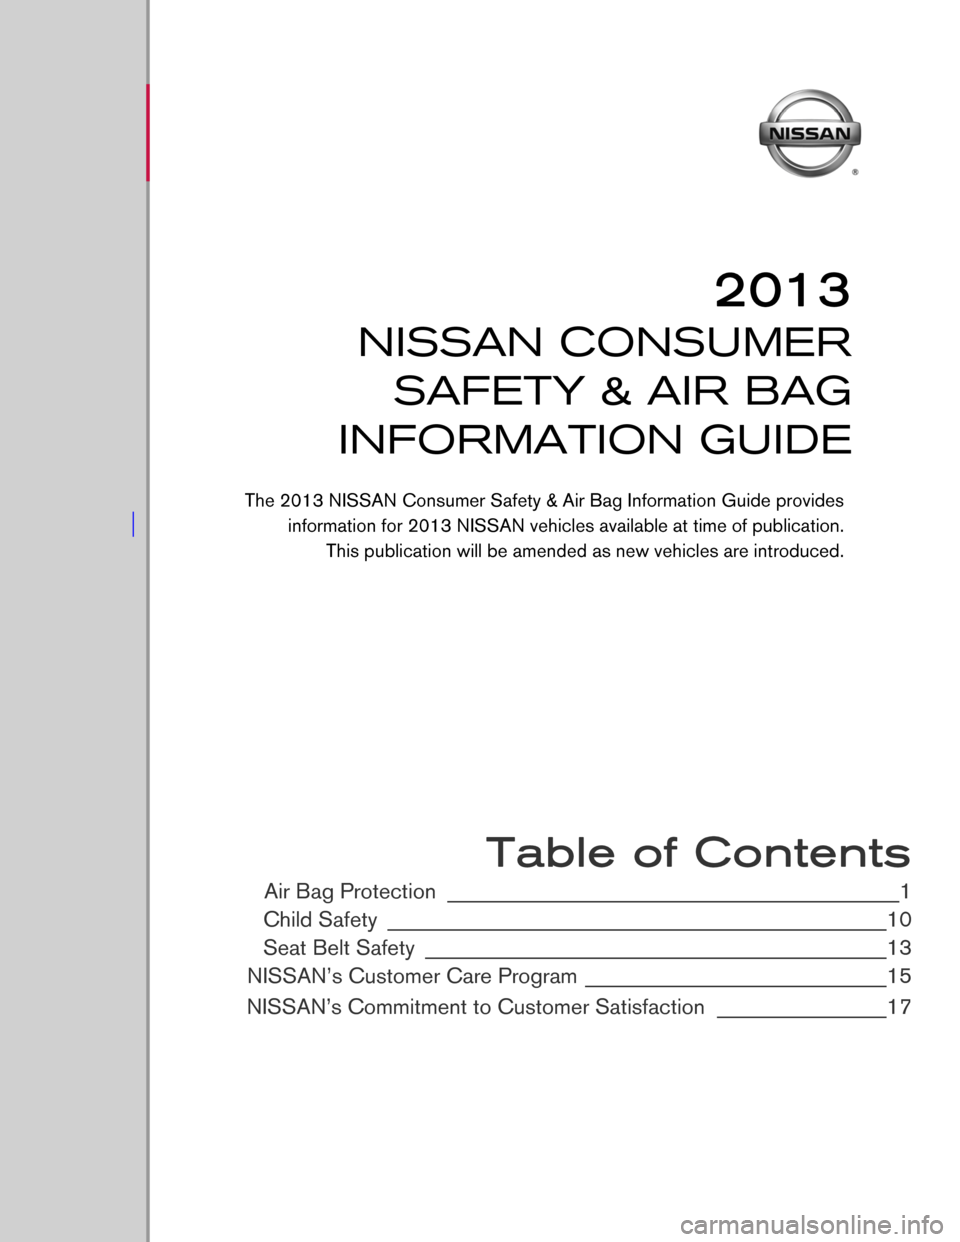 NISSAN TITAN 2013 1.G Consumer Safety Air Bag Information Guide  
 
 
 
 
 
 
 
 
 
 
 
 
 
 
 
 
 
 
 
 
 
 
 Table of Contents
Air Bag Protection ________________________________________________1
Child Safety
 ____________________________________________________